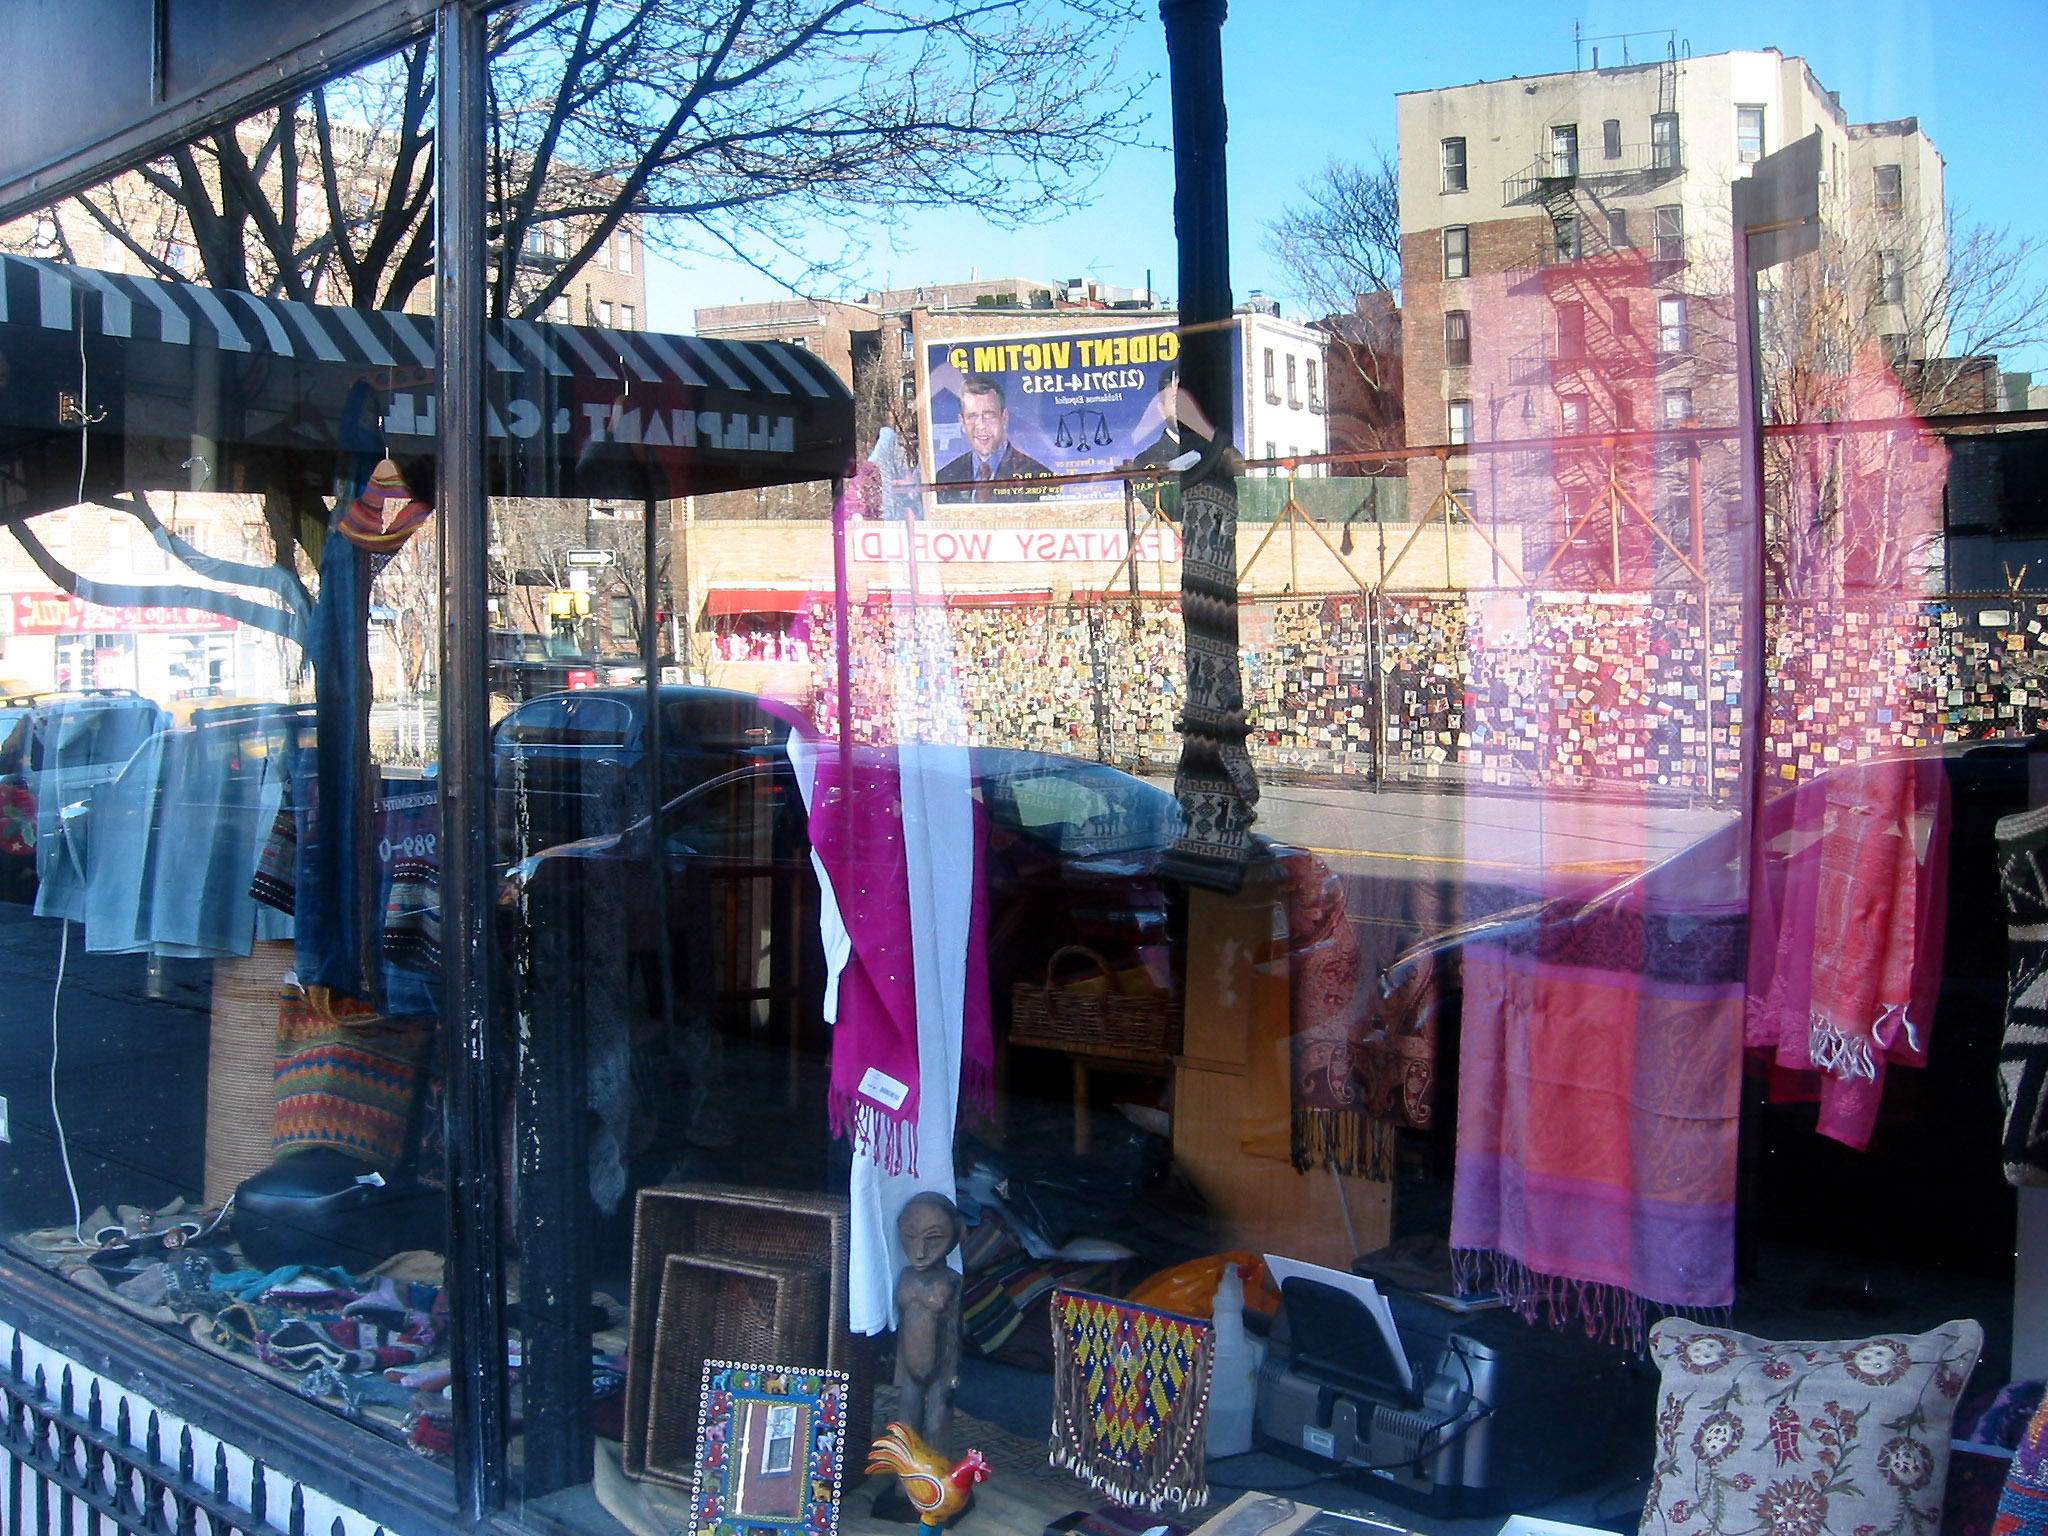 Clothing & Assessories Store with Reflections